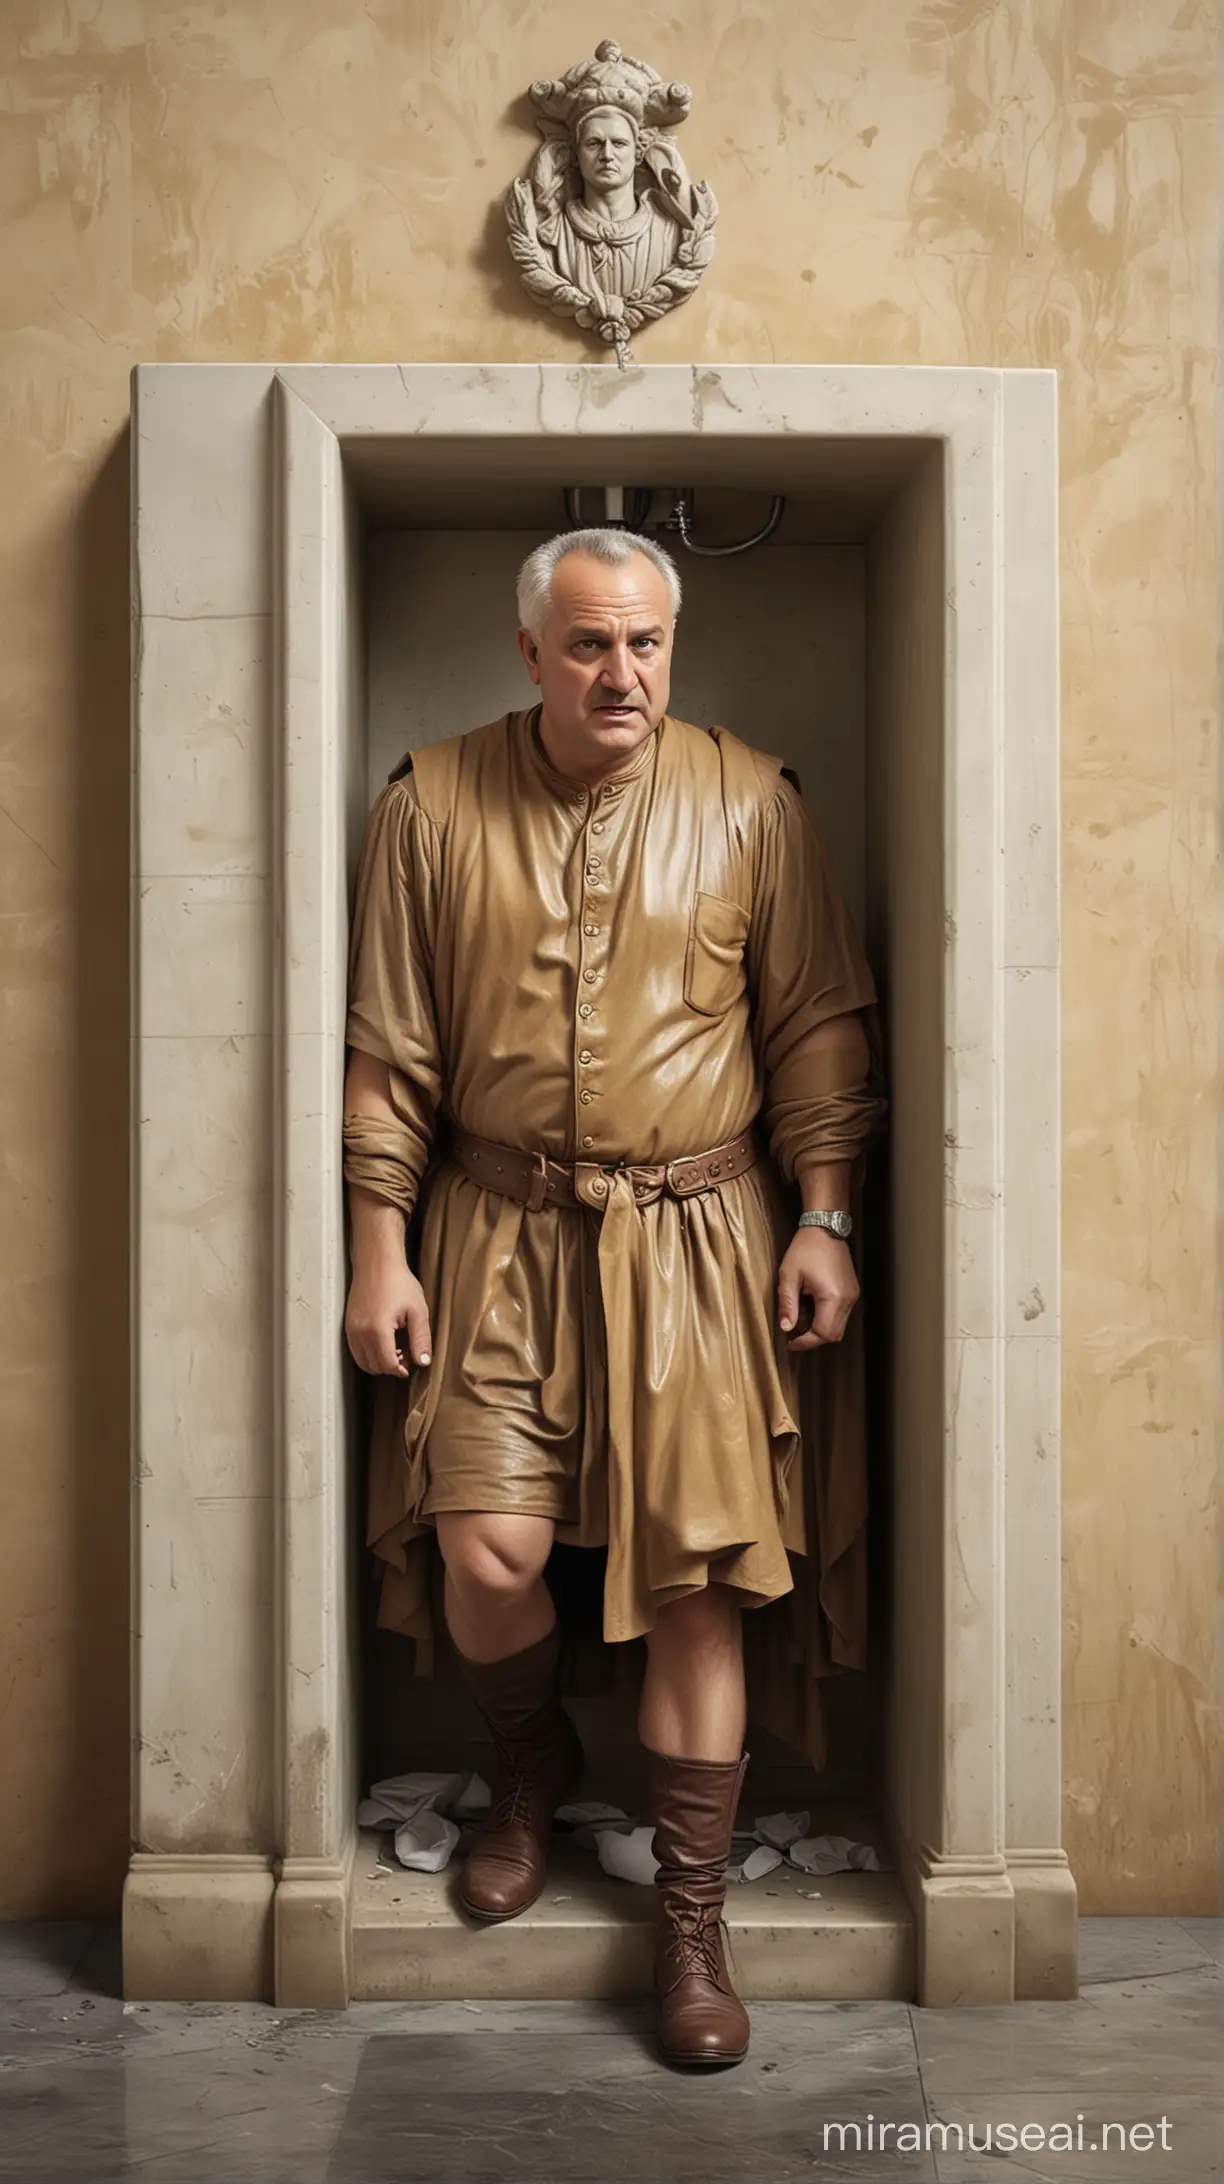 A whimsical illustration of Vespasian implementing his infamous tax on public urinals, capturing the eccentricity of his reign and the controversy surrounding his policies. hyper realistic